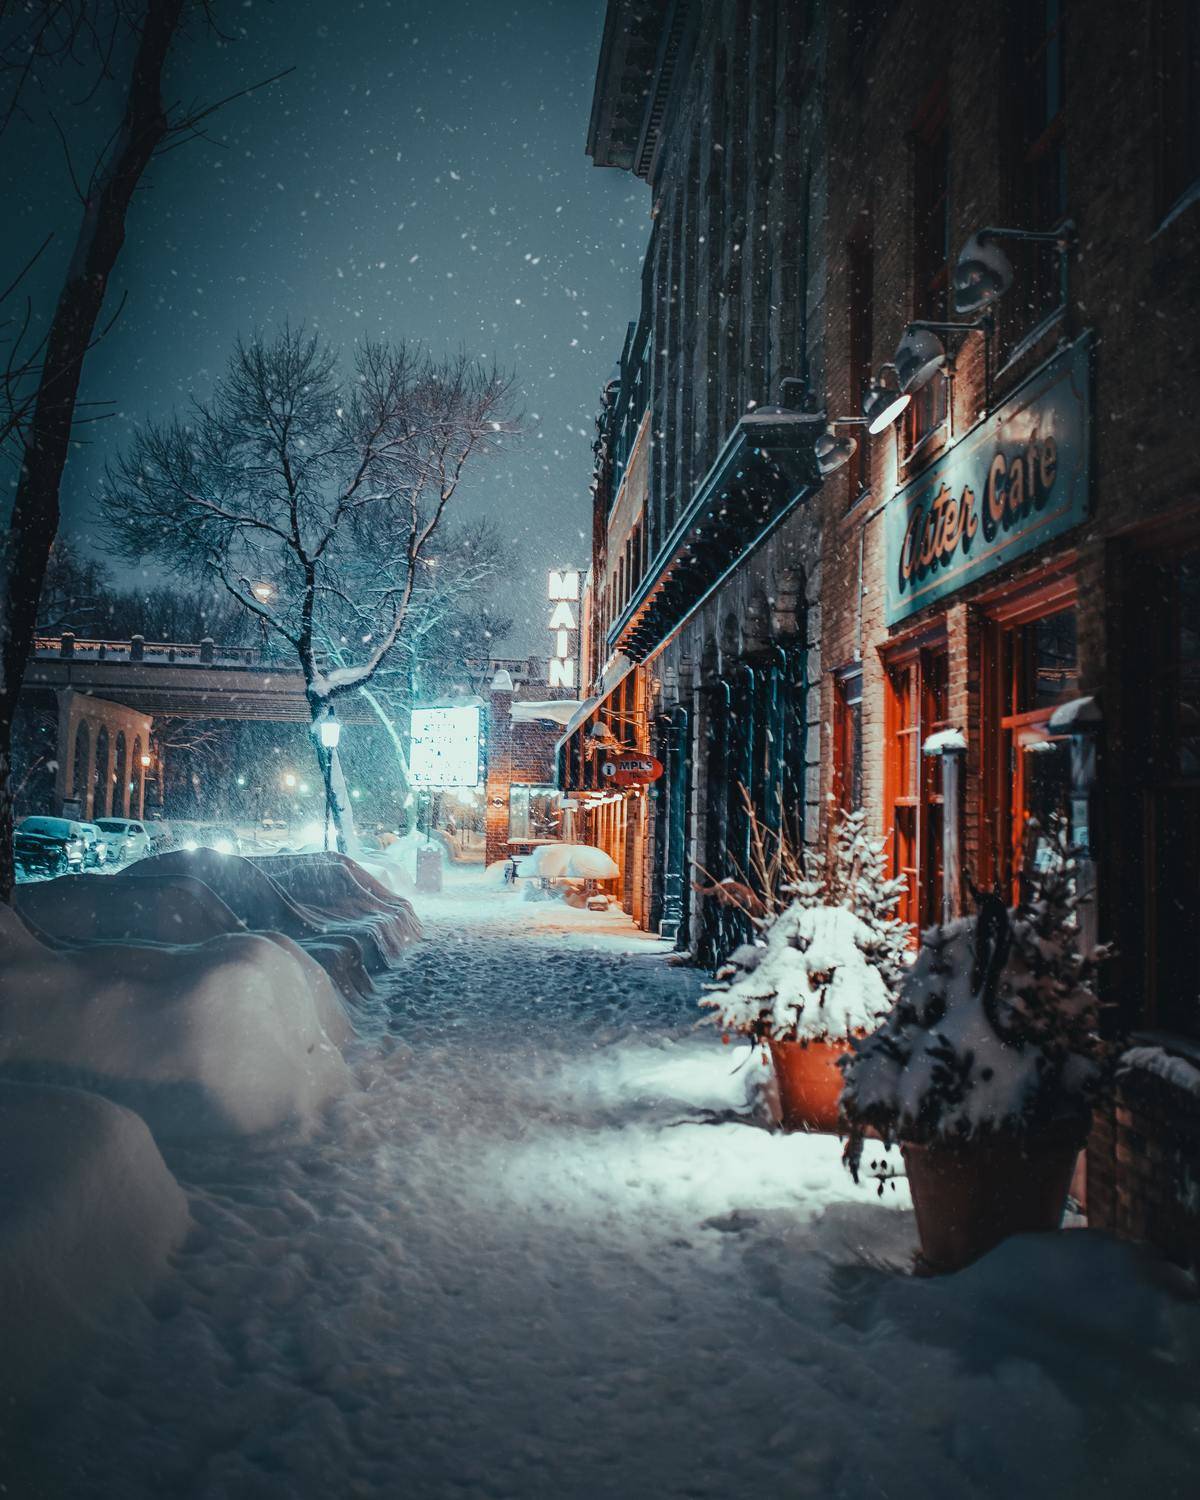 A snowy town street lit up at night.